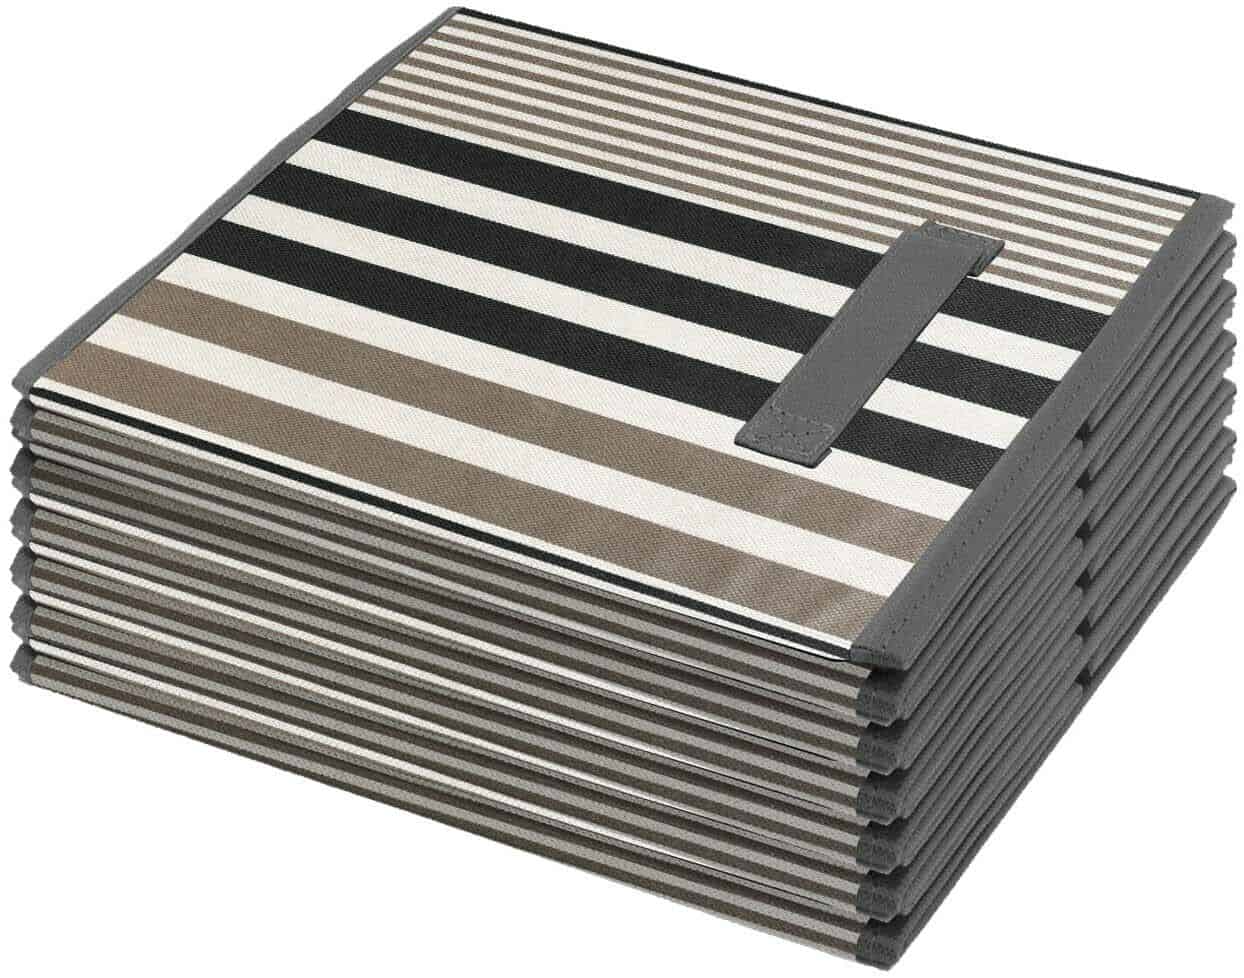 A stack of black and white striped coasters.